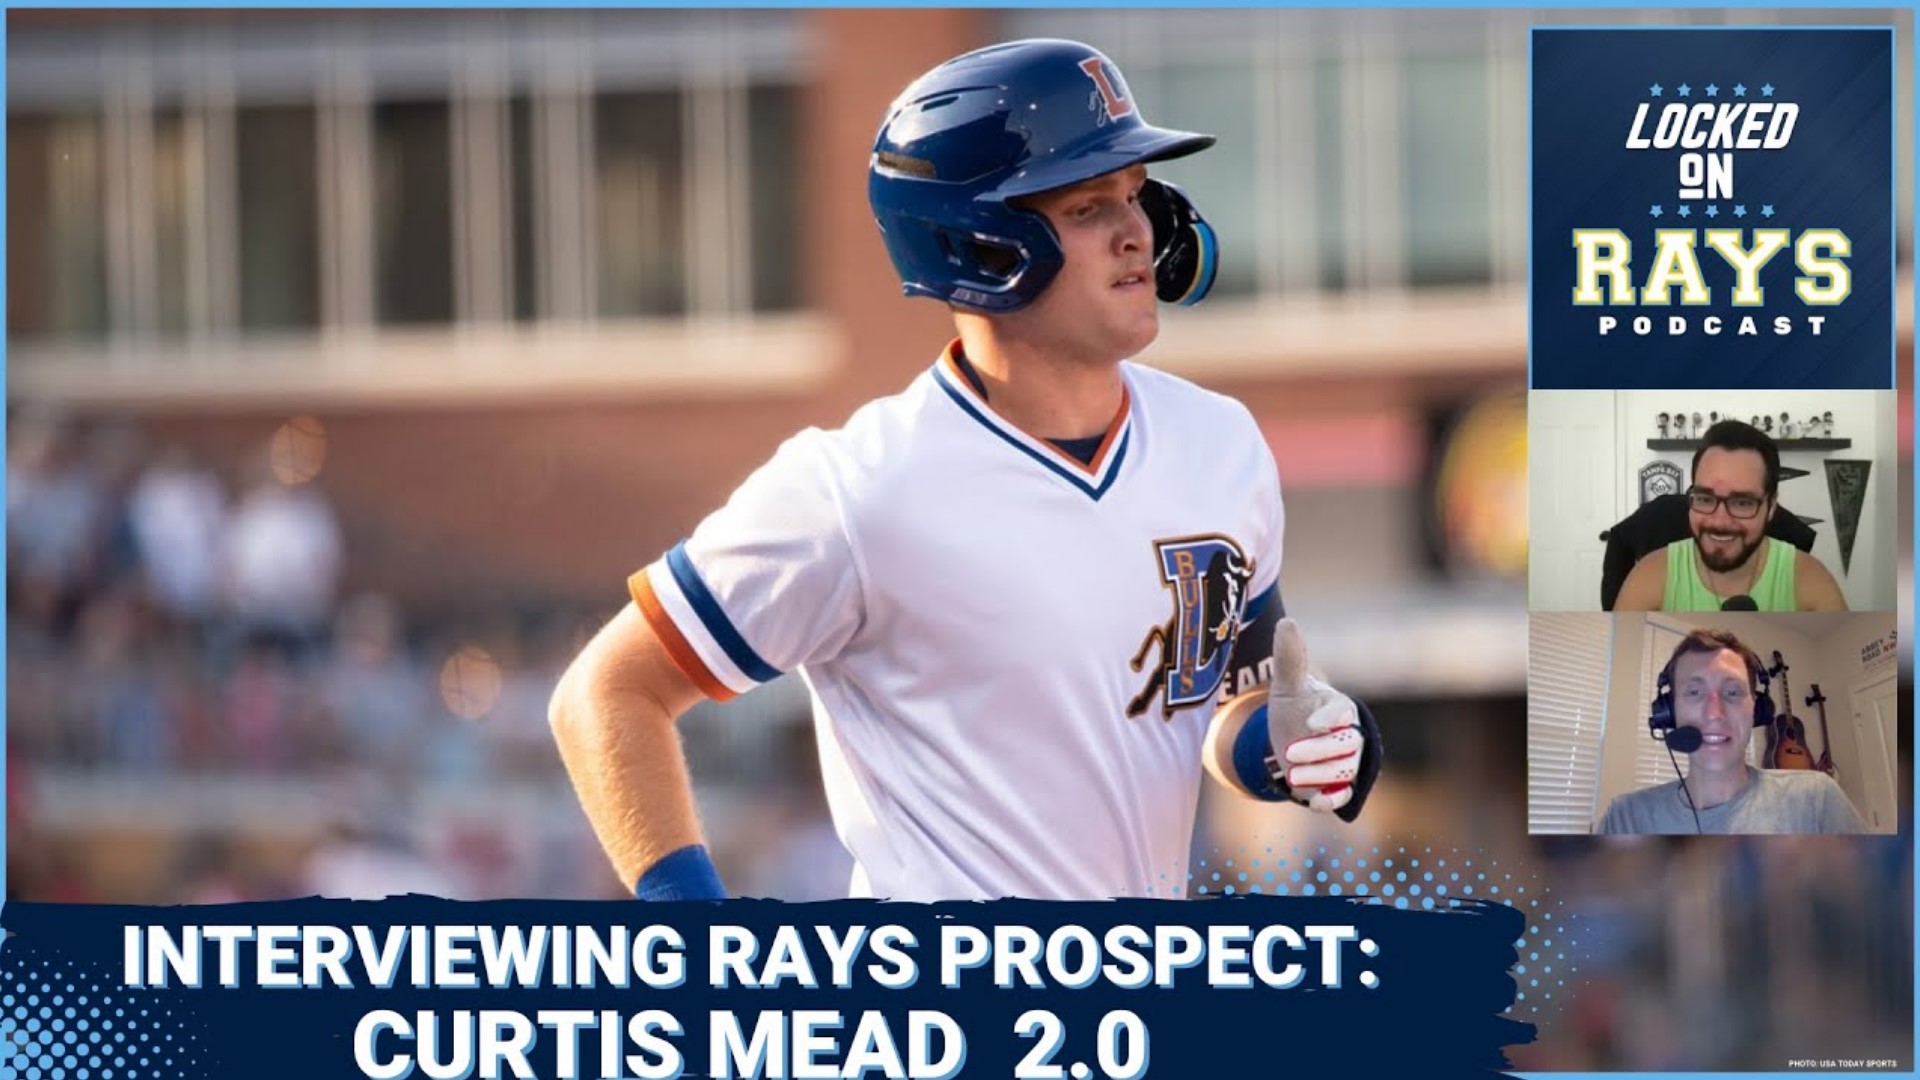 Locked On Rays has the pleasure to once again have the Rays' top position player prospect on the podcast, Curtis Mead!